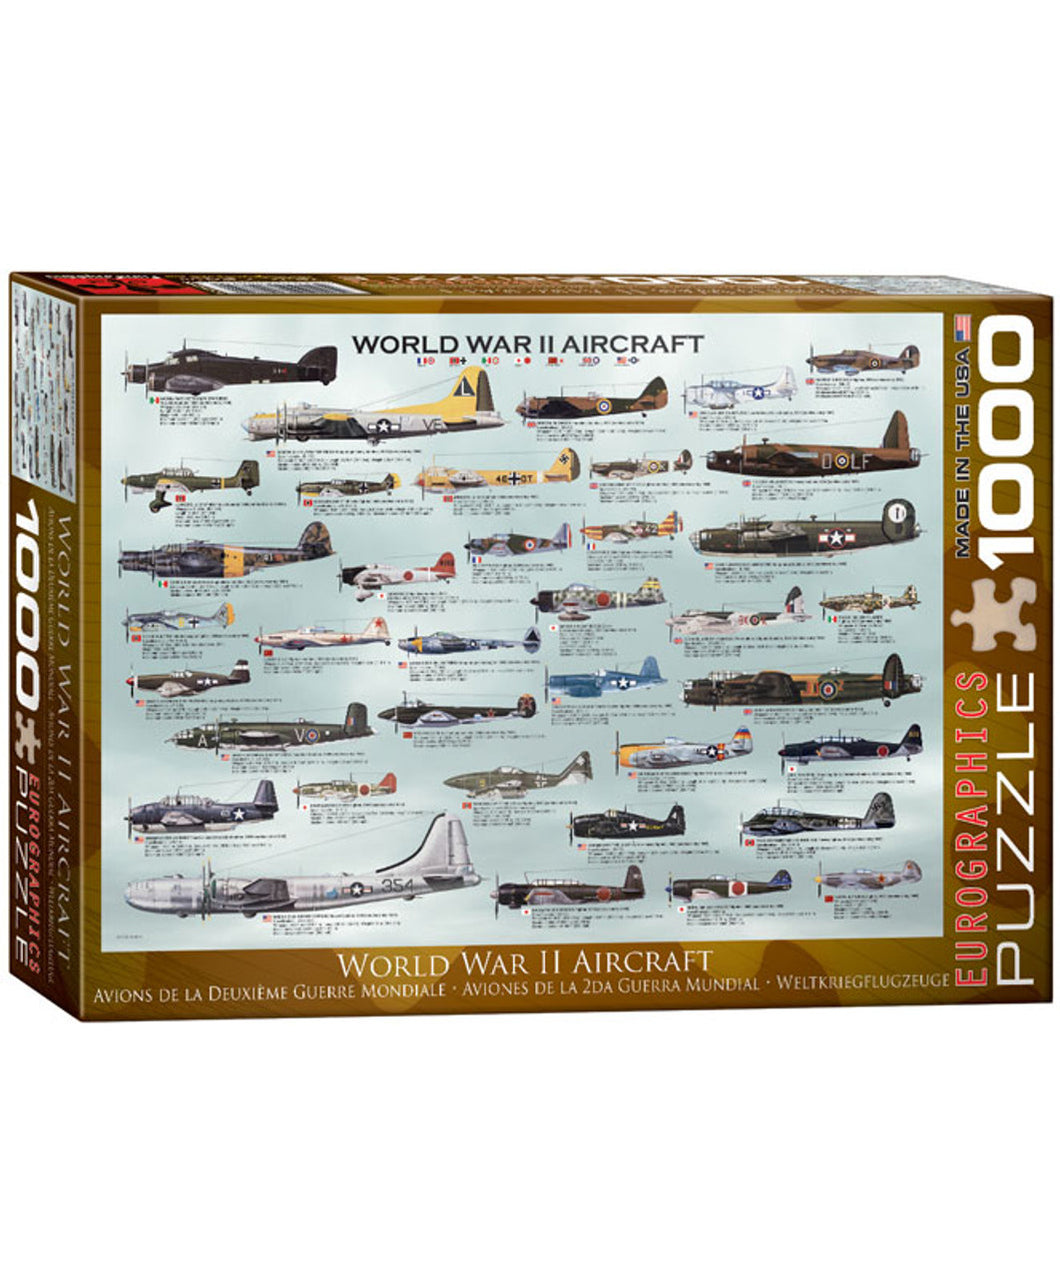 WWII Aircraft Puzzle